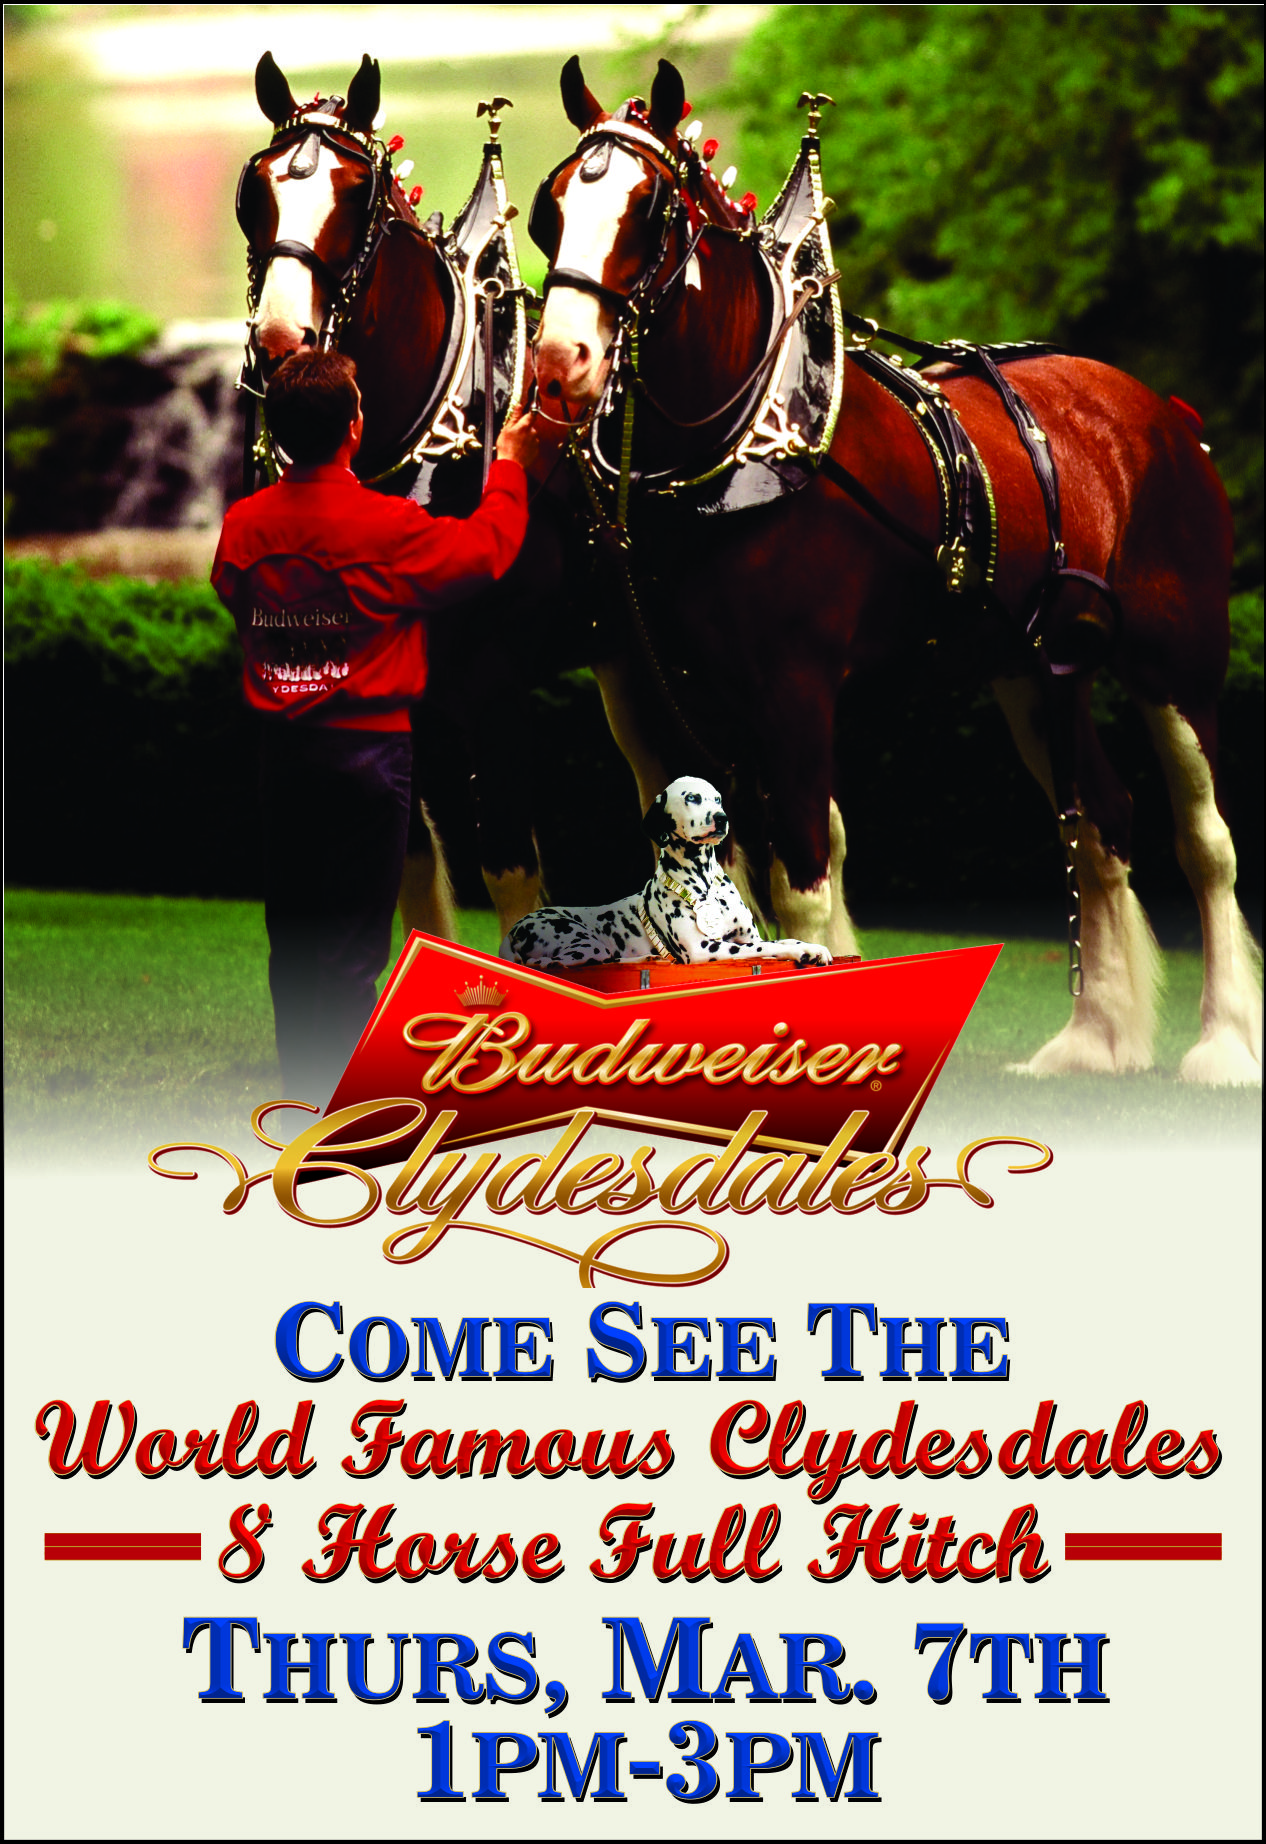 http://www.arcinvestments.com/cms_files/original/clydesdales__002_.JPG